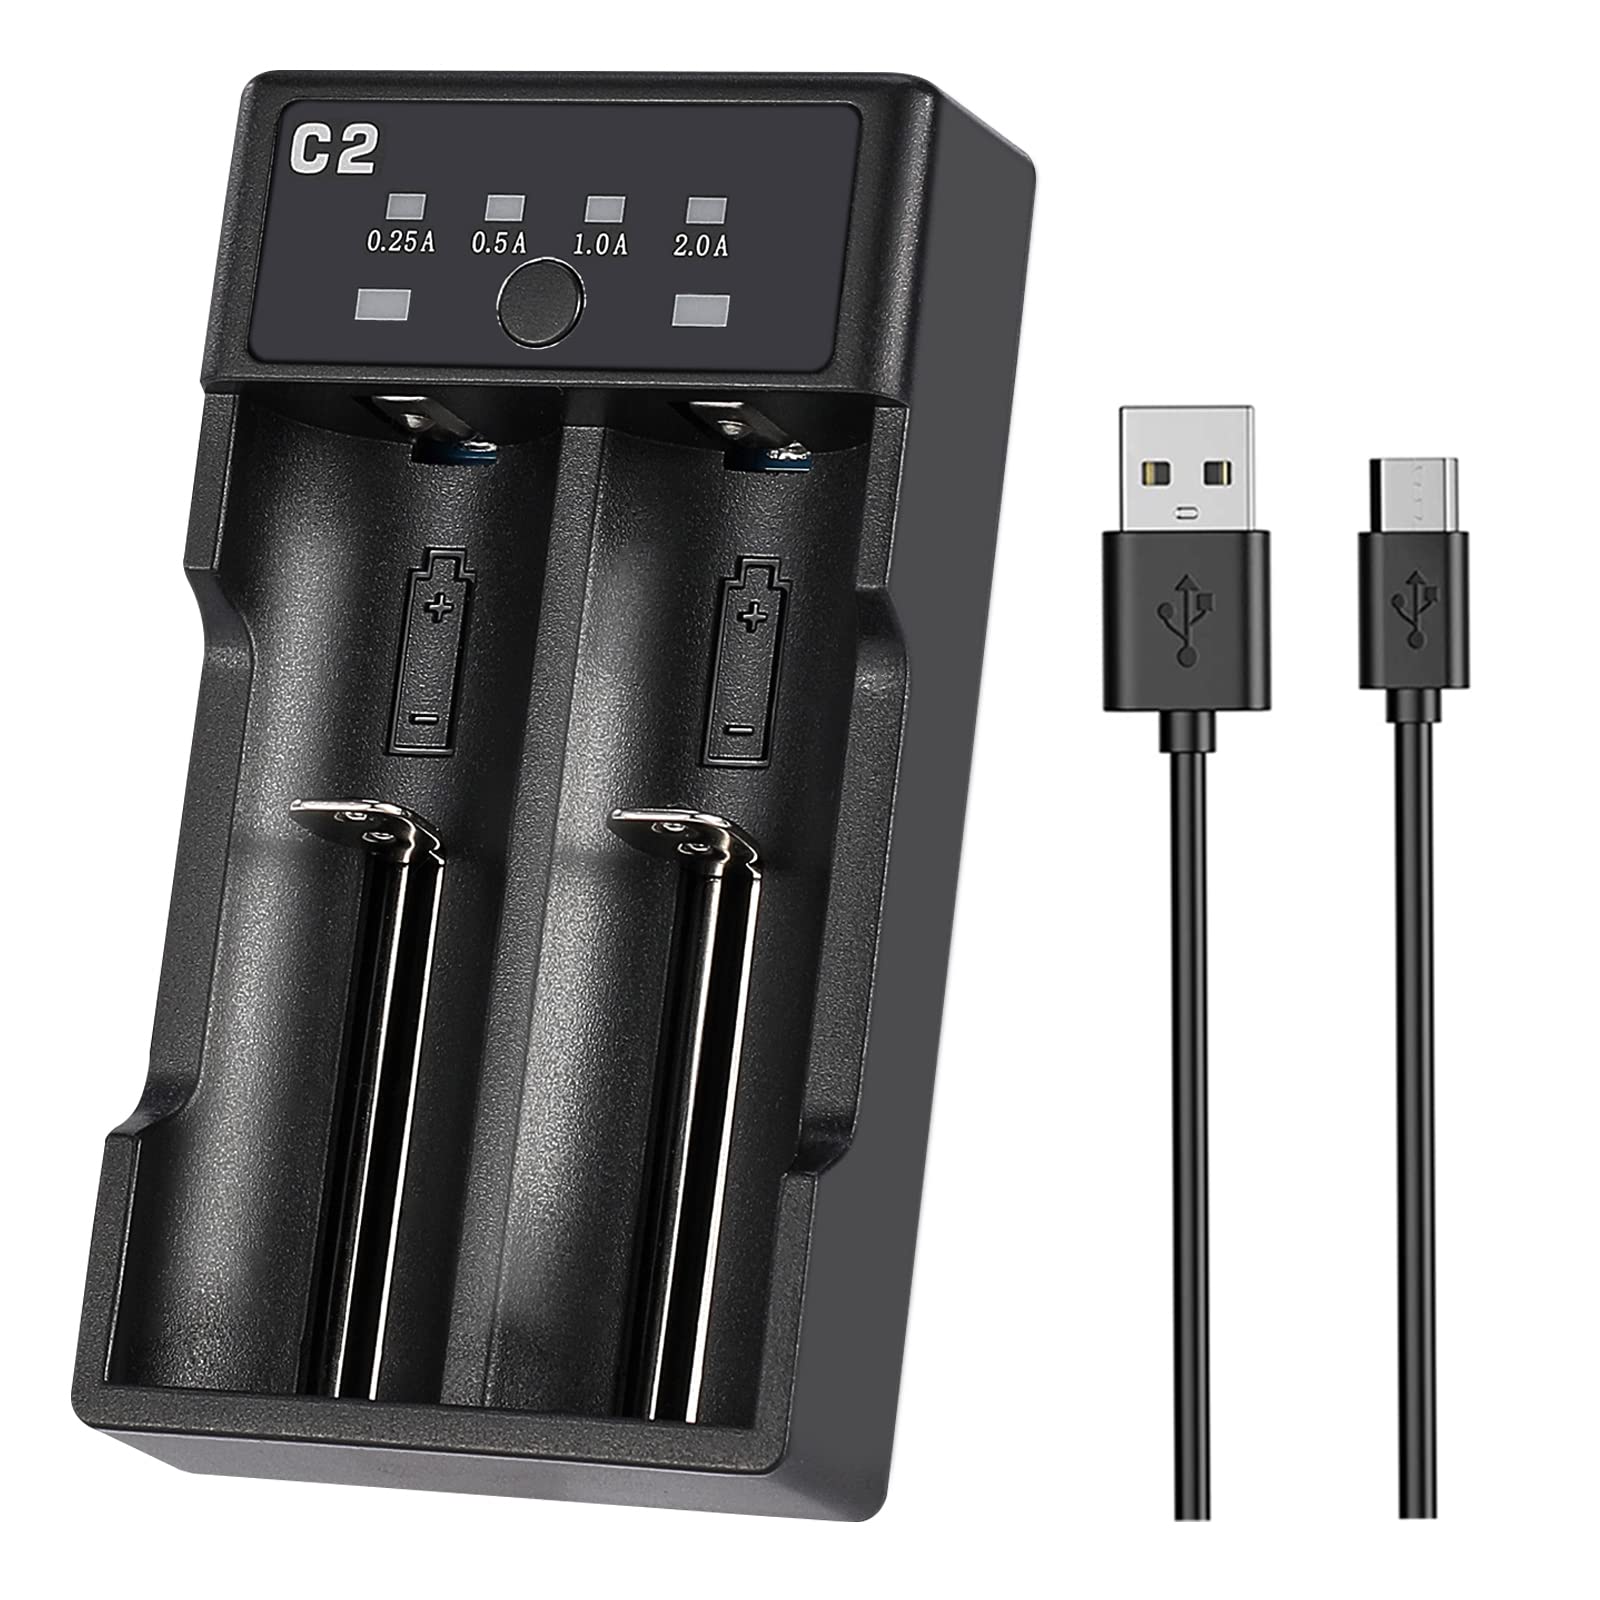 Aweite Universal Battery Charger, 2-Bay Battery Smart Charger for Li-ion/NiMH/NiCD, for 18650, 16340, 26650, AA, AAA, and More 3.7V USB Fast Portable Battery Charger